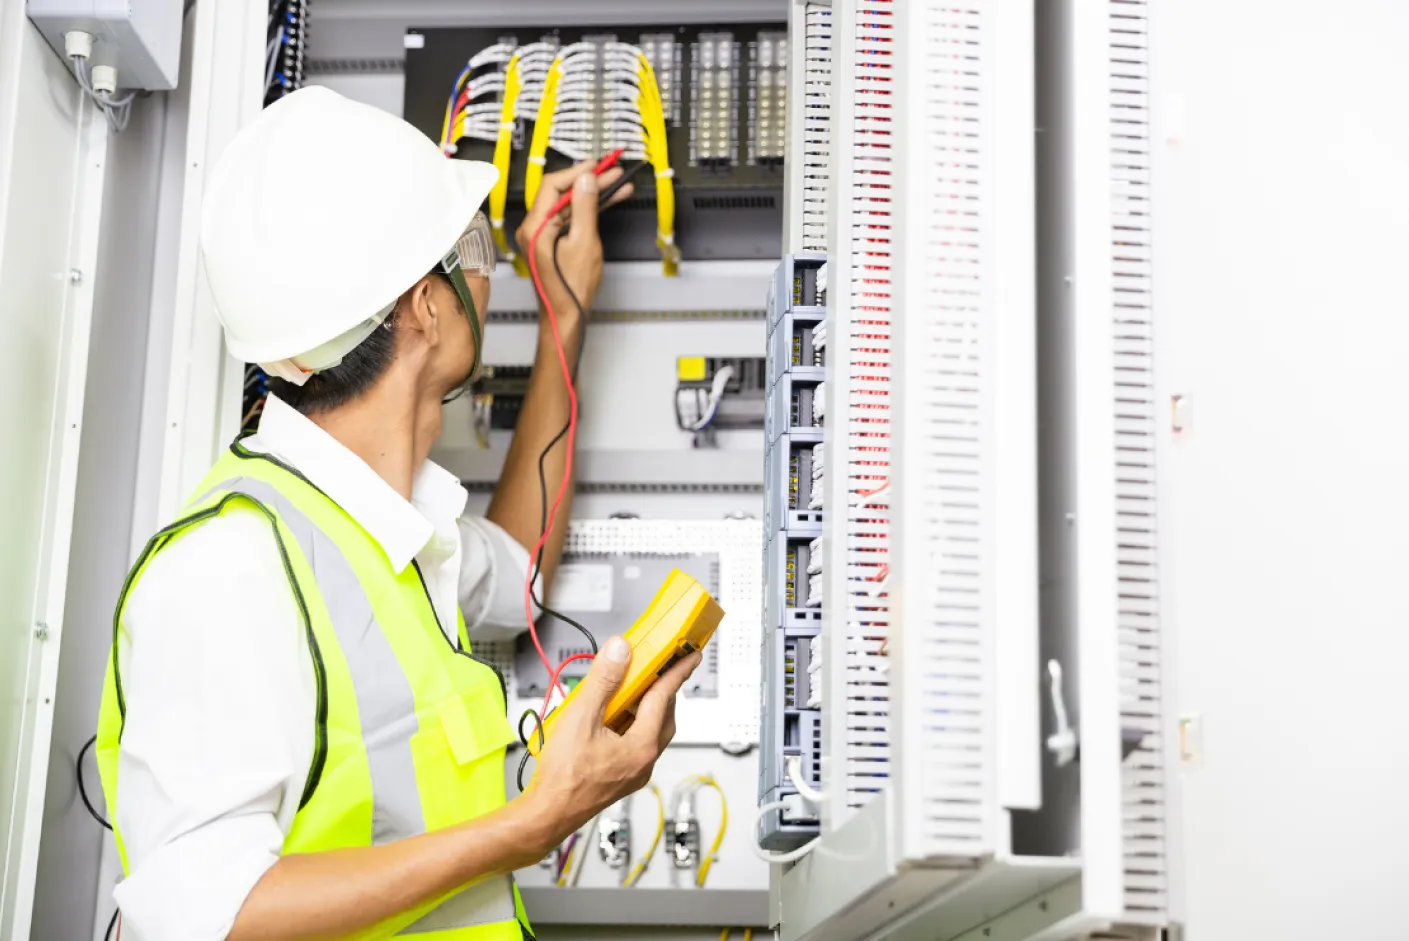 Learn how to pass your electrical aptitude test with Easy Quizzz